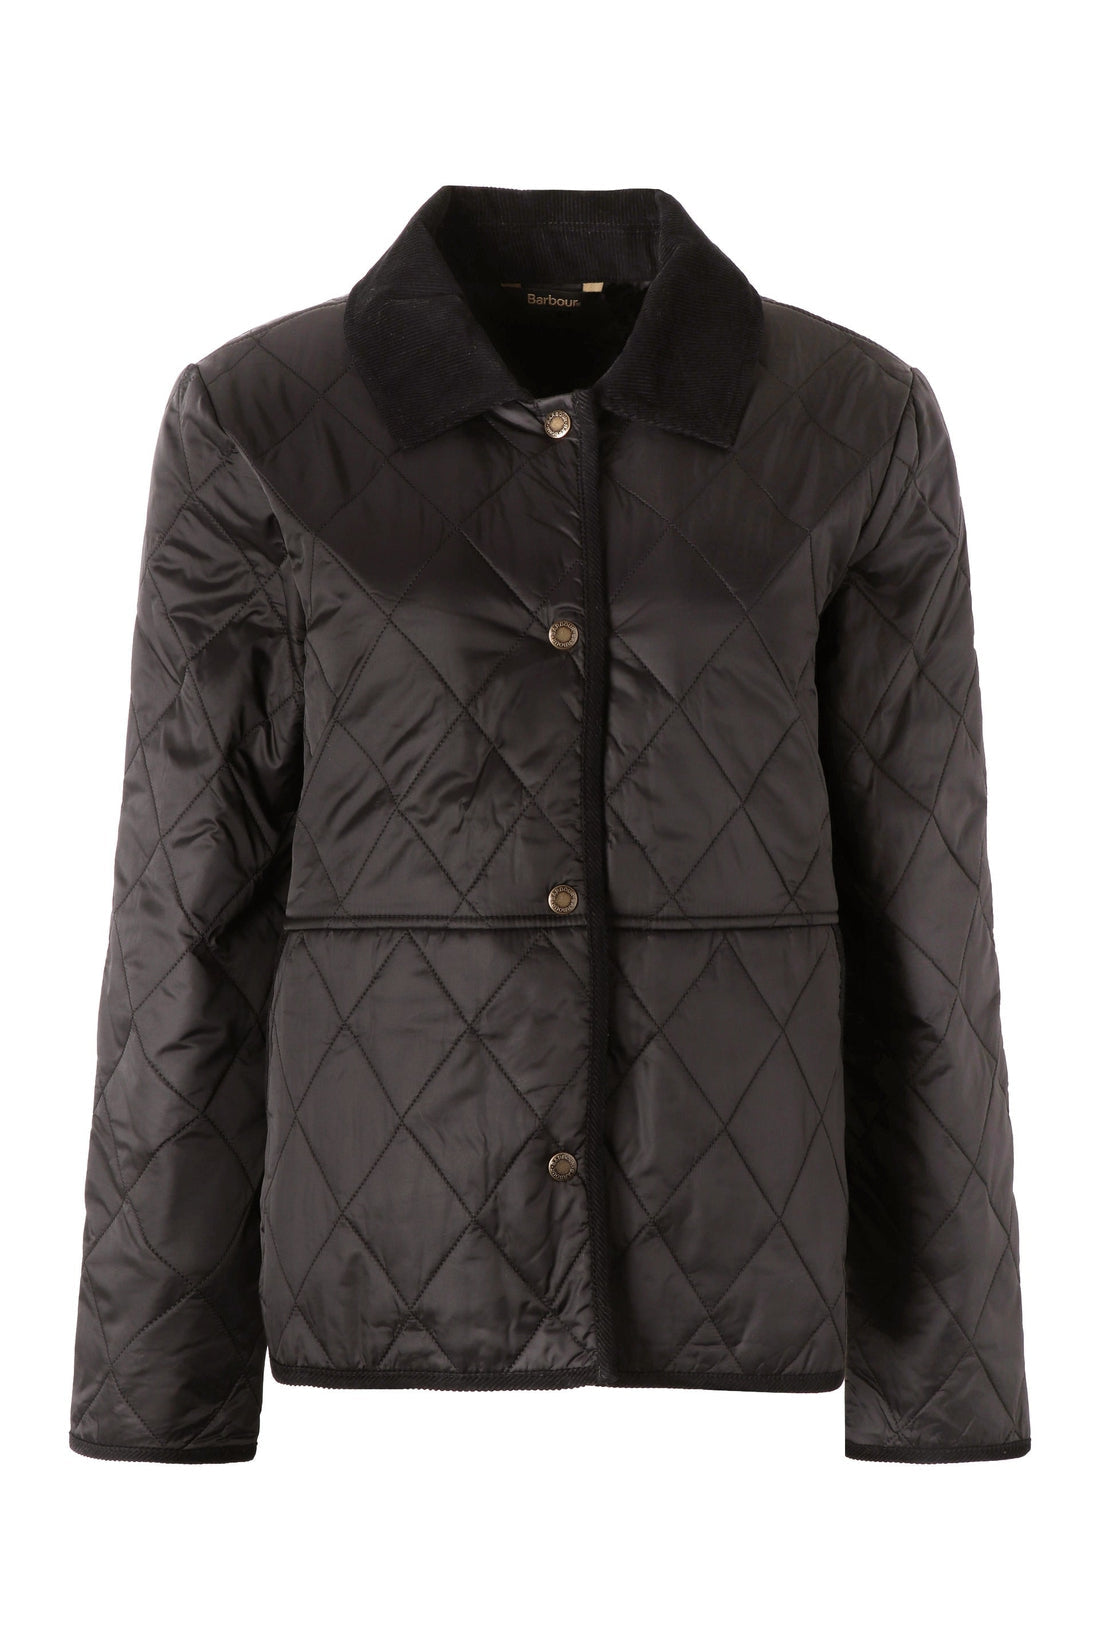 Barbour-OUTLET-SALE-Barbour Clydebank quilted jacket-ARCHIVIST